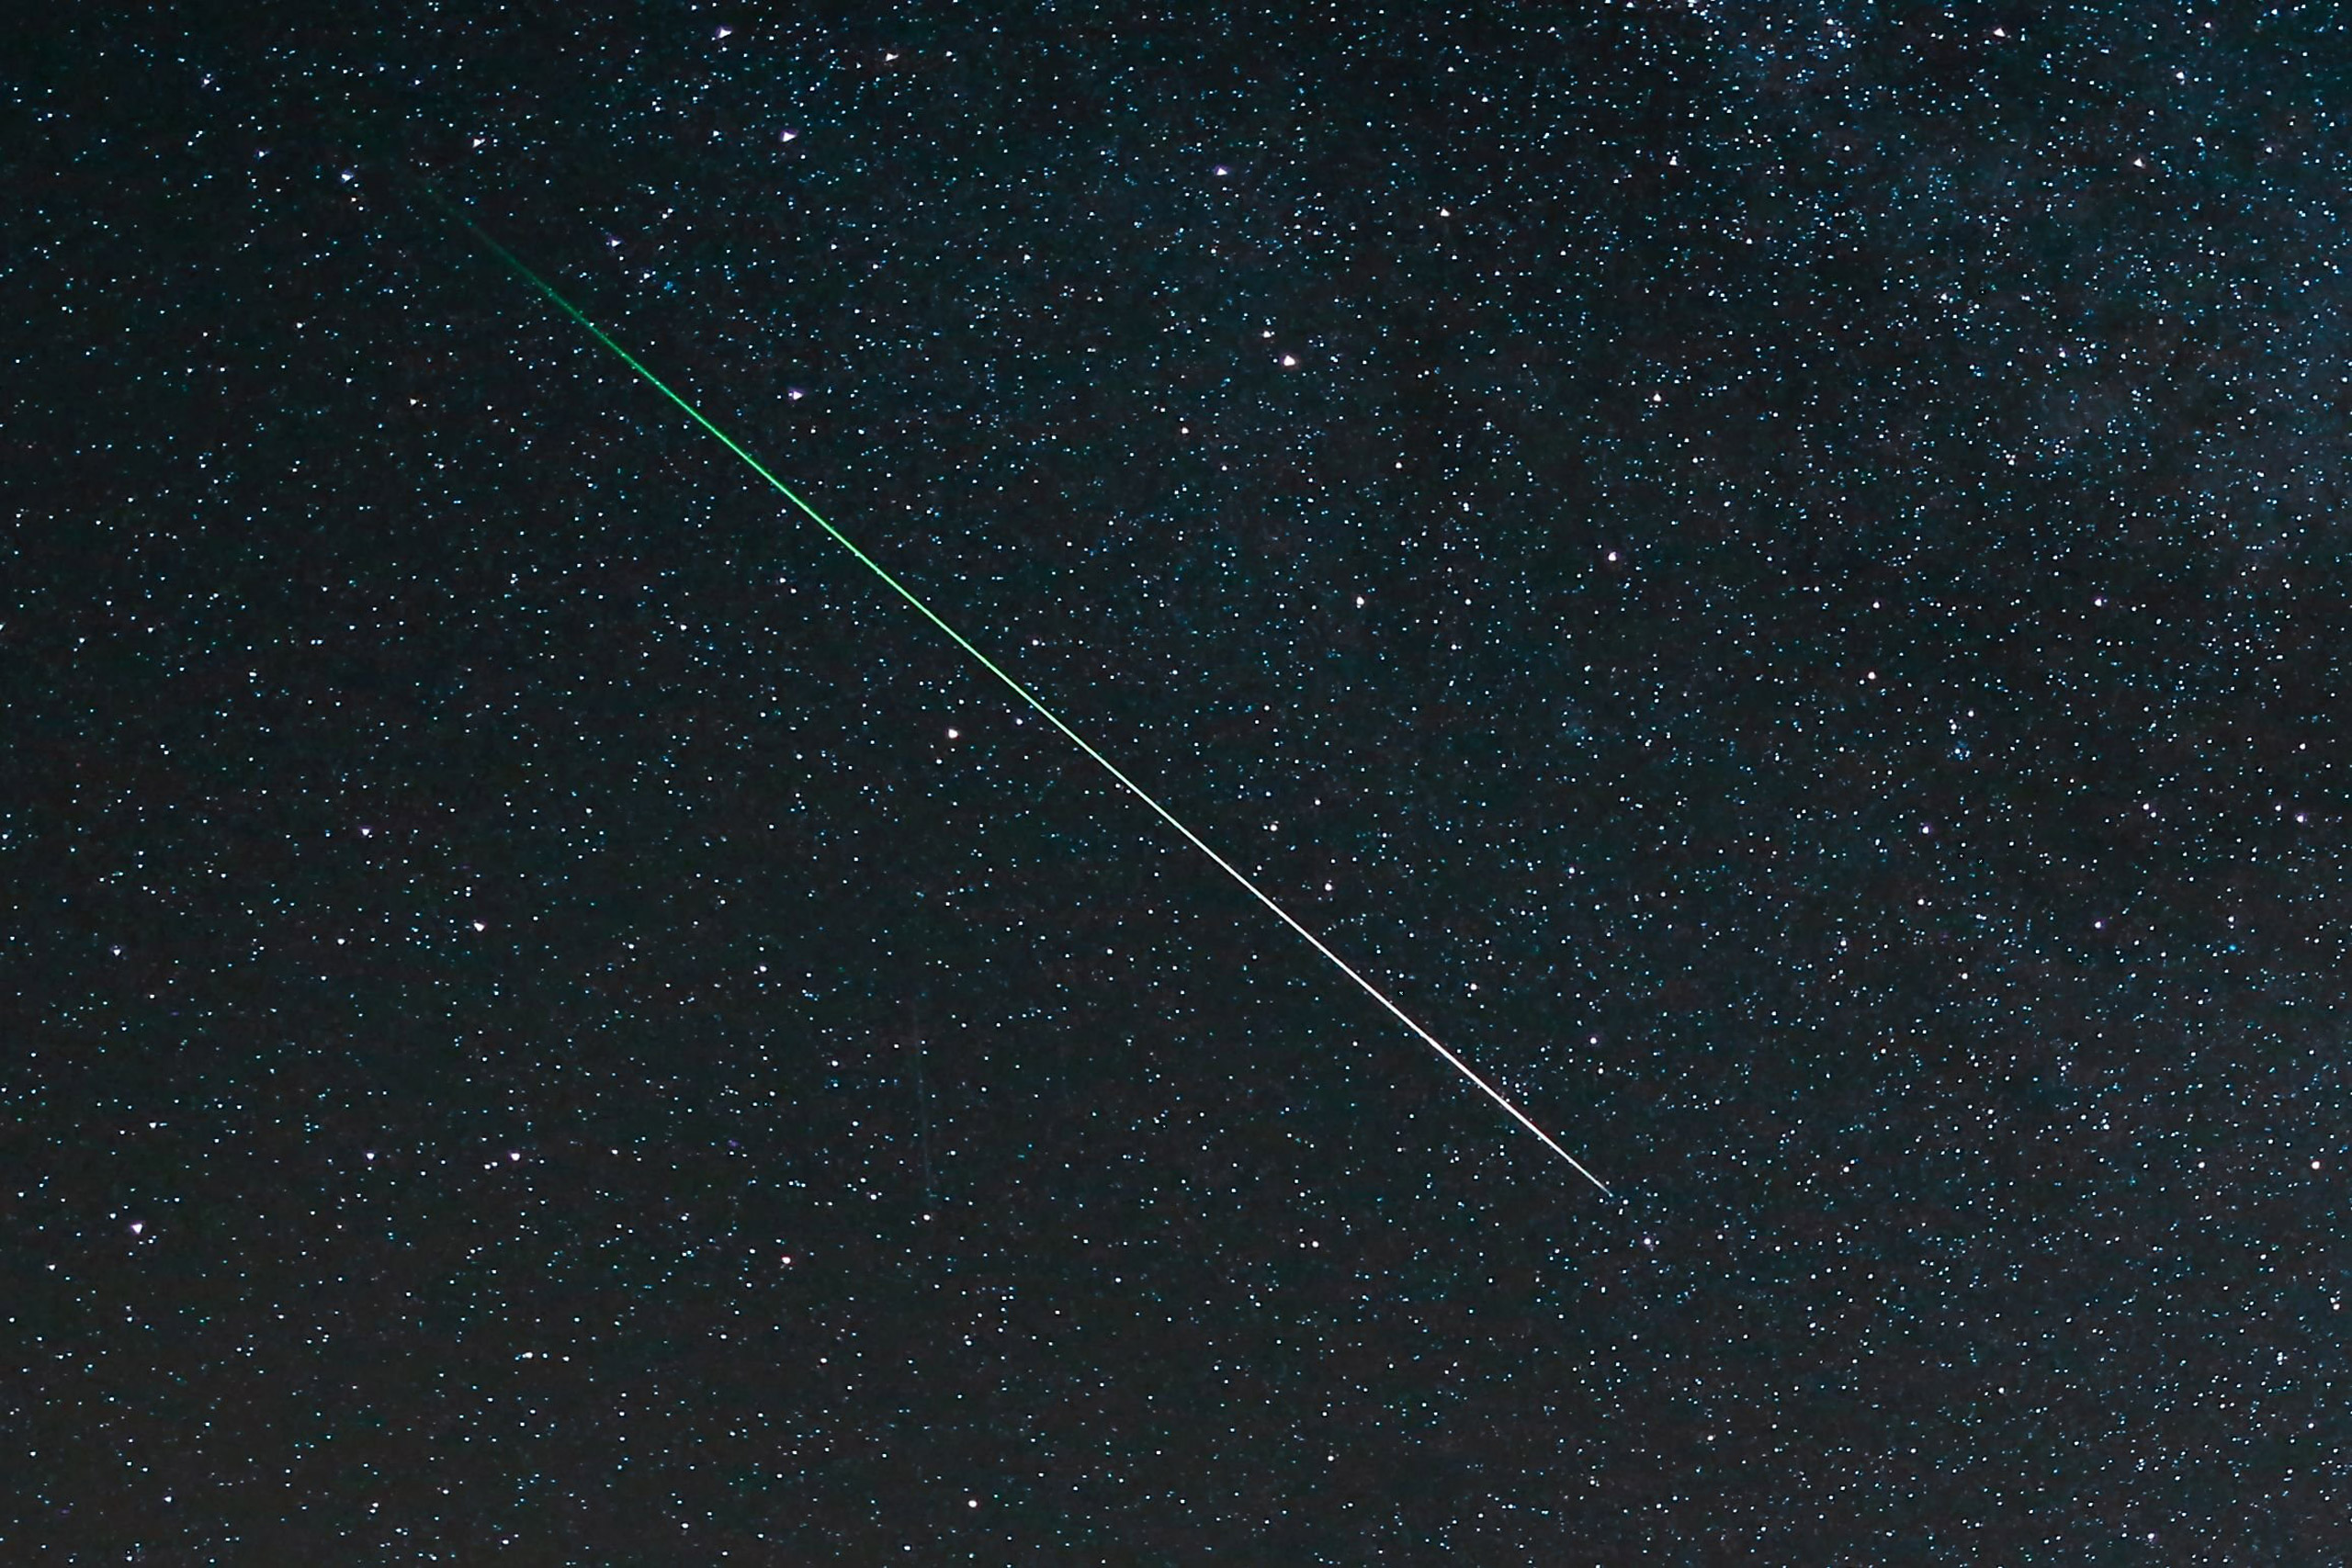 The Perseid Meteor Shower over Northamptonshire, England on Aug. 11, 2015.